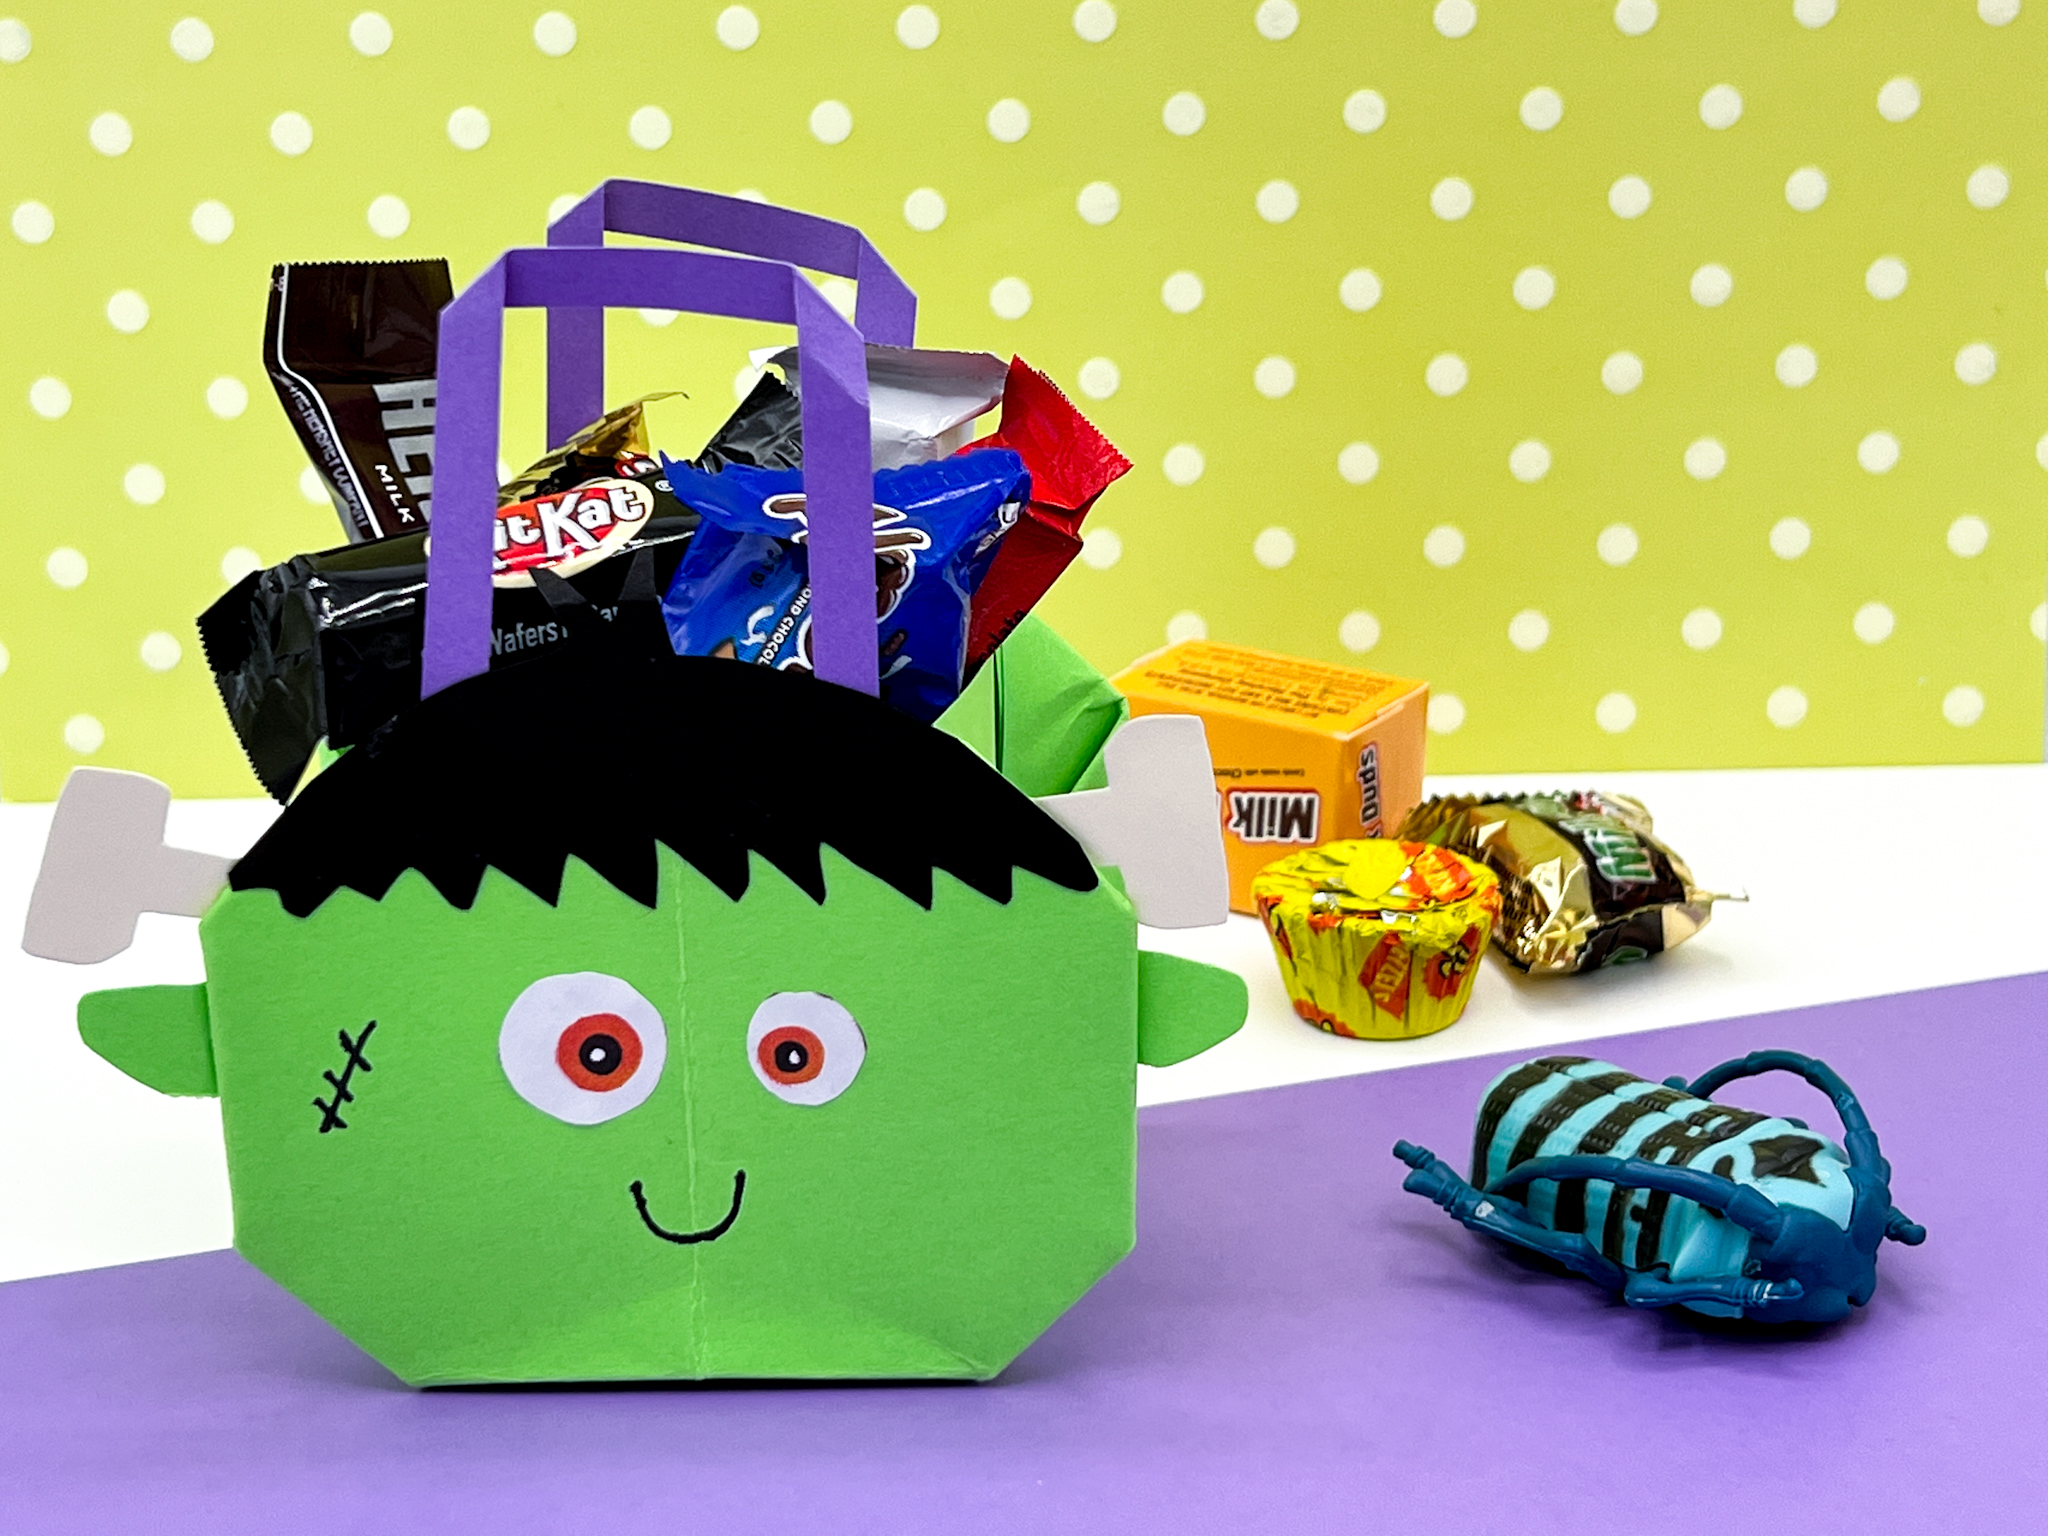 Halloween Origami Craft - Frankenstein Treat Bag Follow this easy photo & video tutorial for a Halloween Origami Craft - Frankenstein Treat Bag. This DIY is great to do with kids OR adults! FREE PDF printable template and instructions & Video!